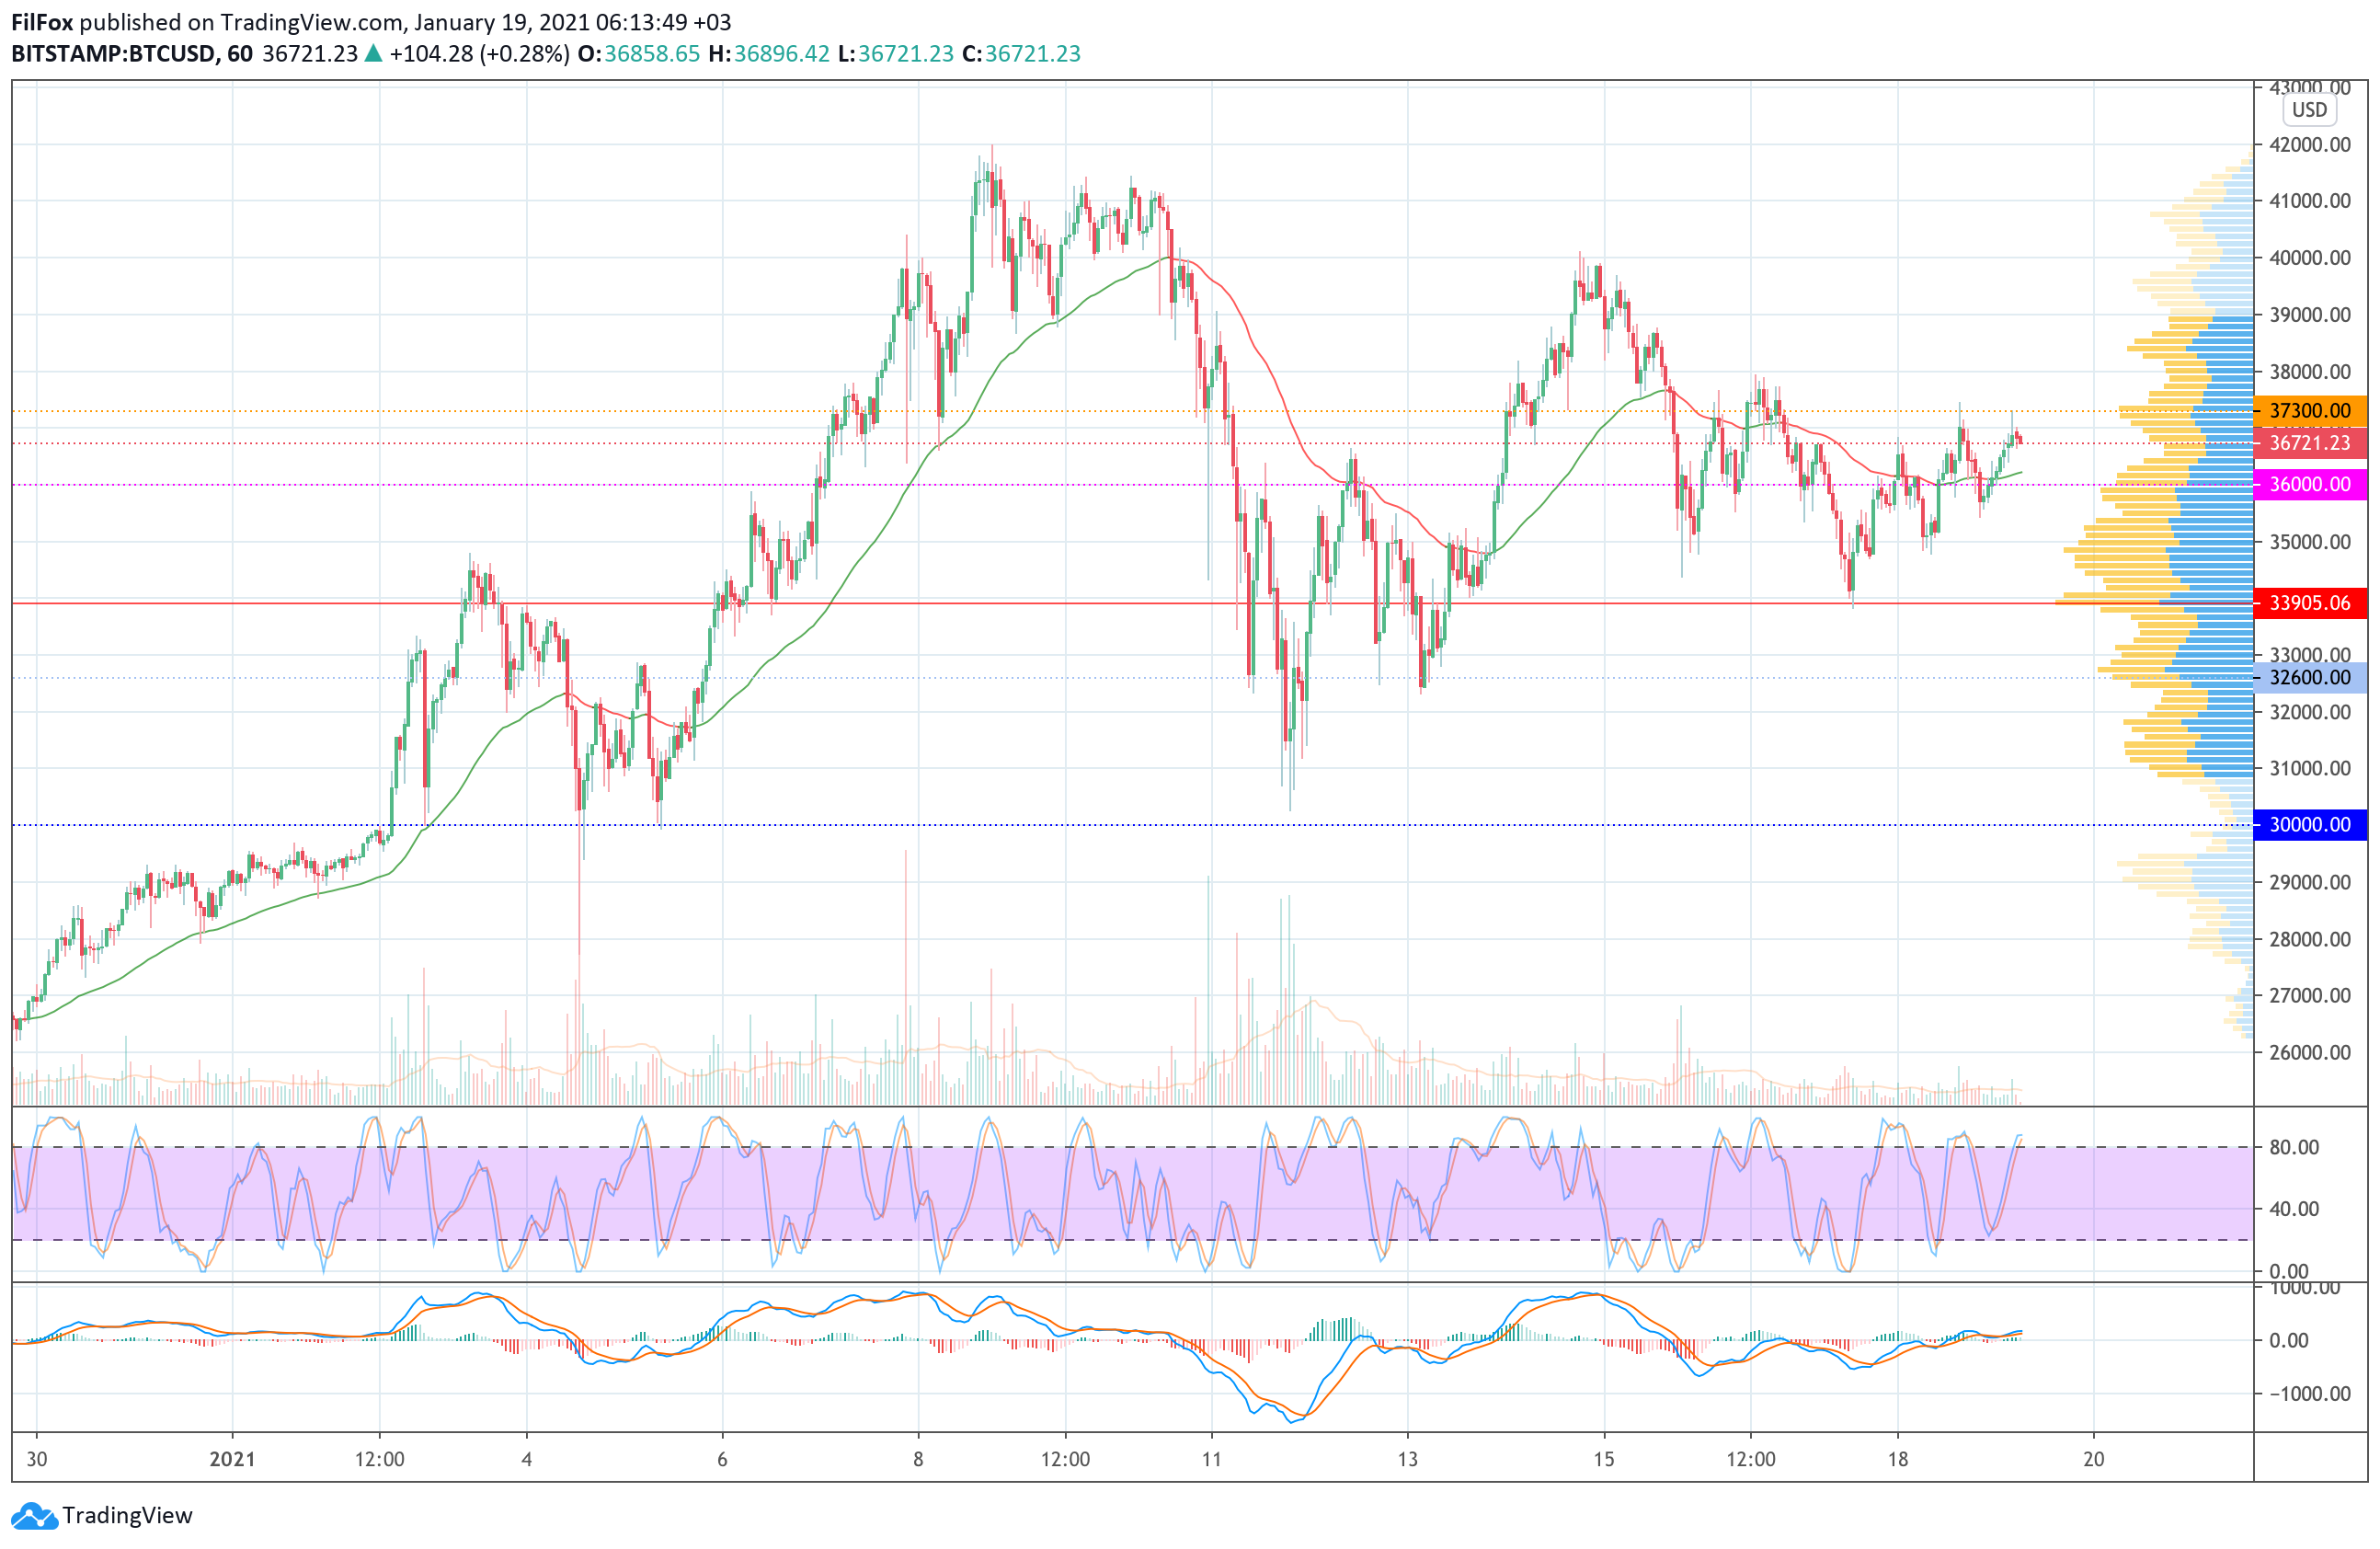 Analysis of prices for Bitcoin, Ethereum, Ripple for 01/19/2021